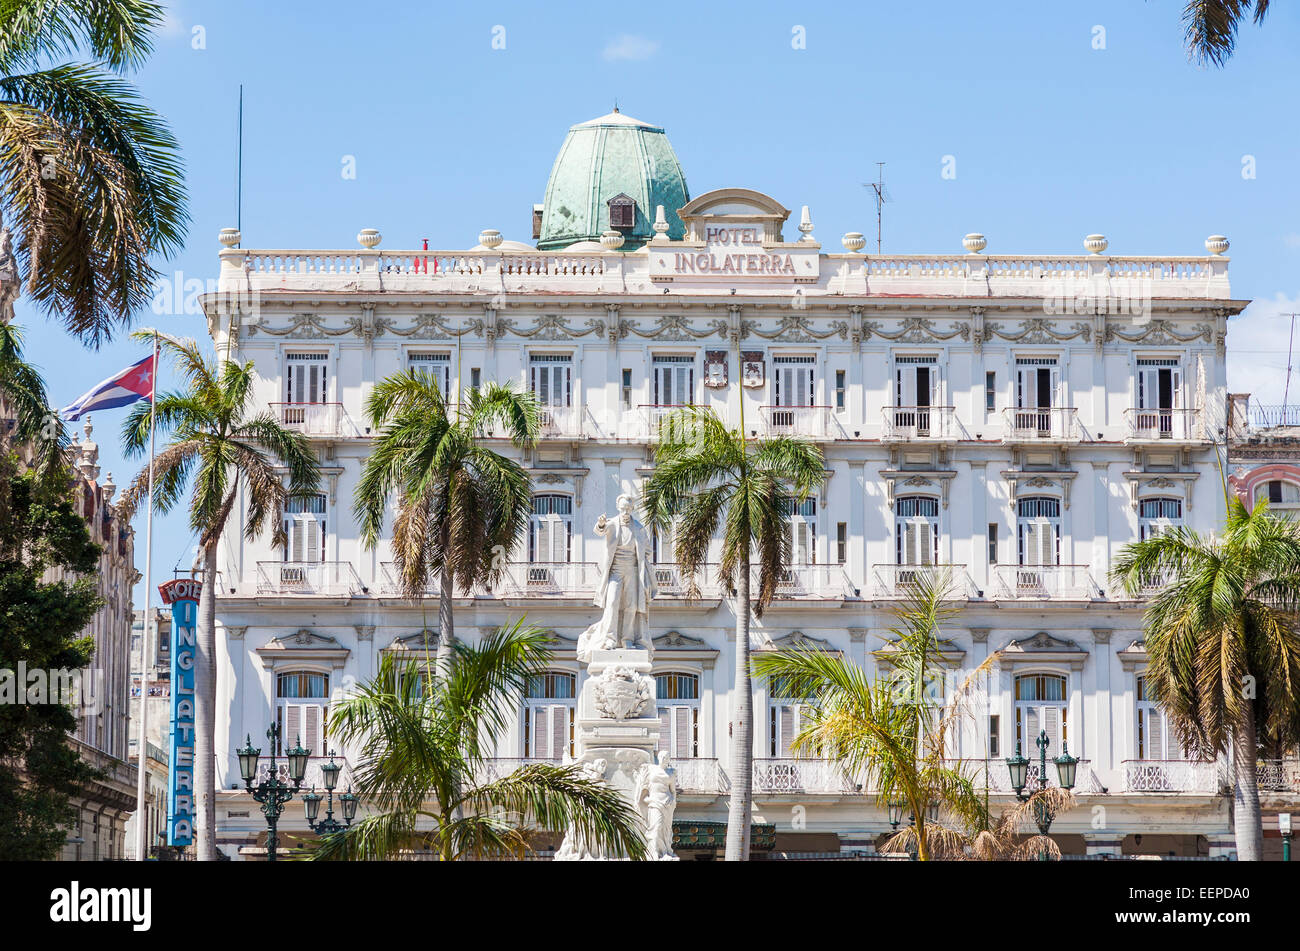 View of the classical frontage of Hotel Inglaterra, the oldest hotel in Cuba, with statue of Jose  Marti, at Parque Central, Paseo del Prado, Havana Stock Photo